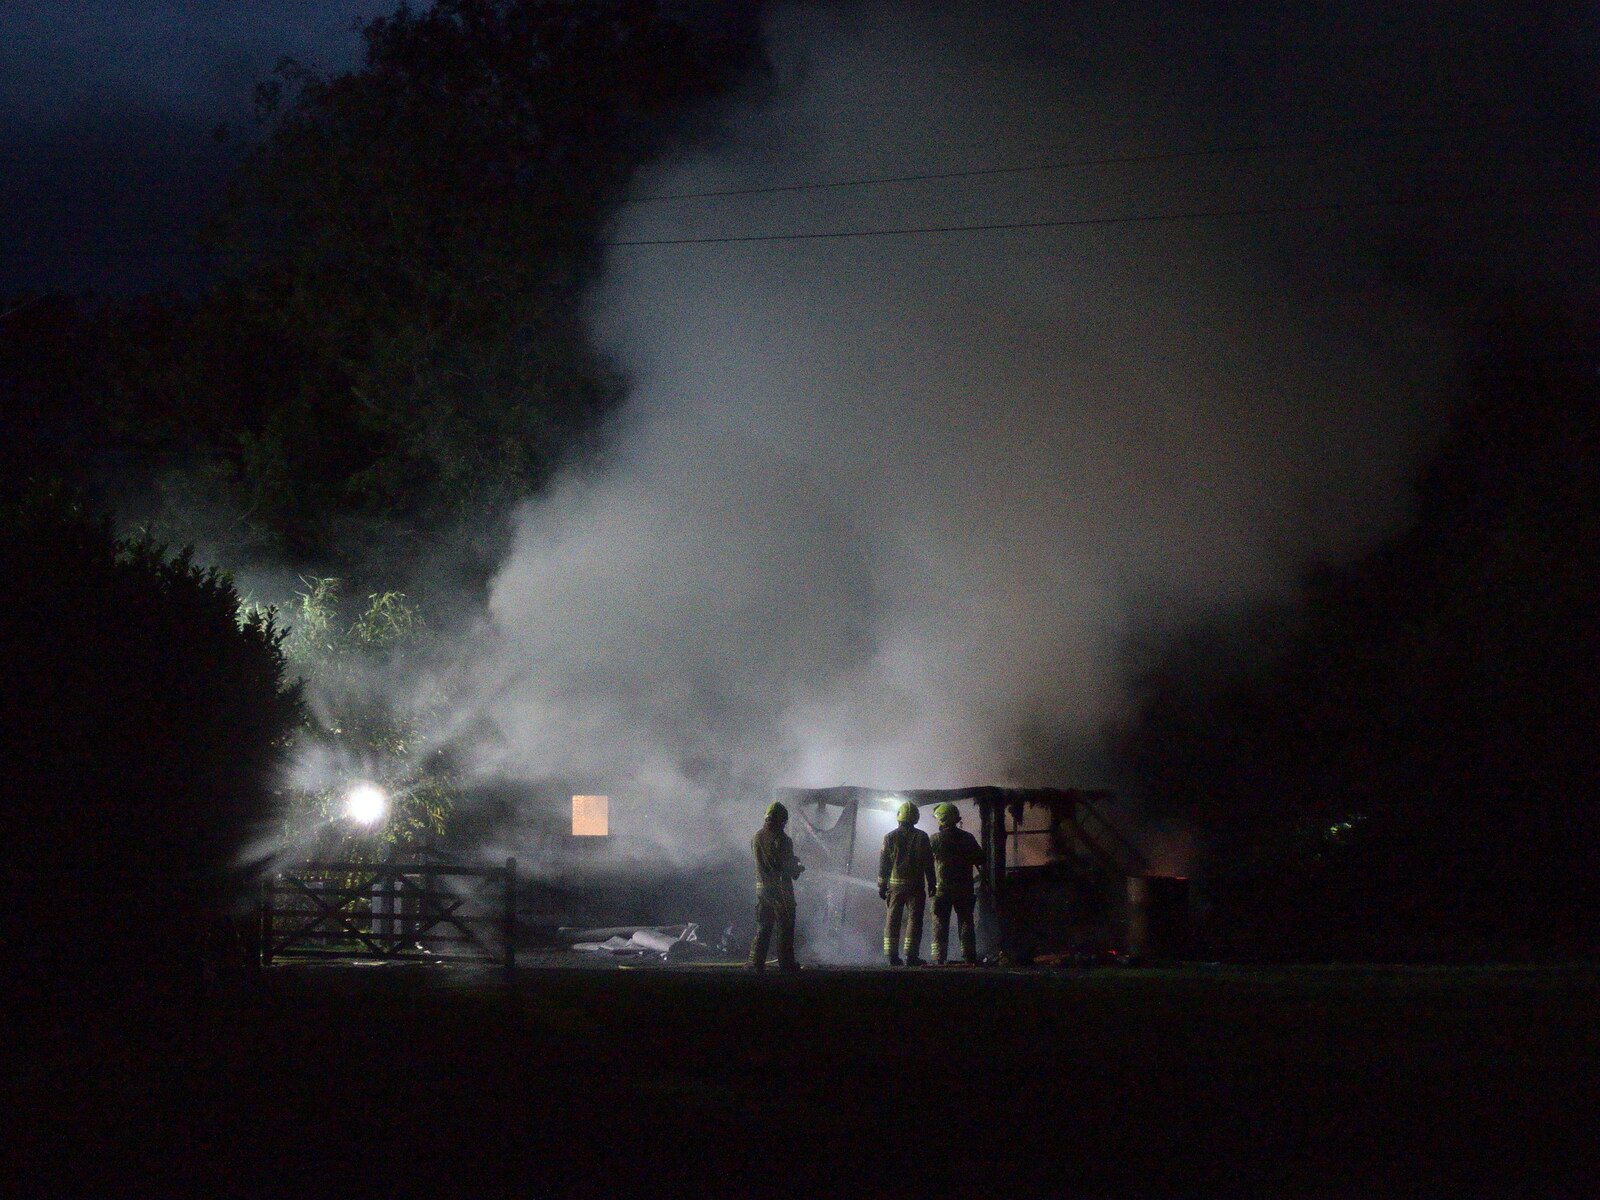 Firemen stand around from A Fire, a Fête, and a Scout Camp, Hallowtree, Suffolk - 30th June 2022